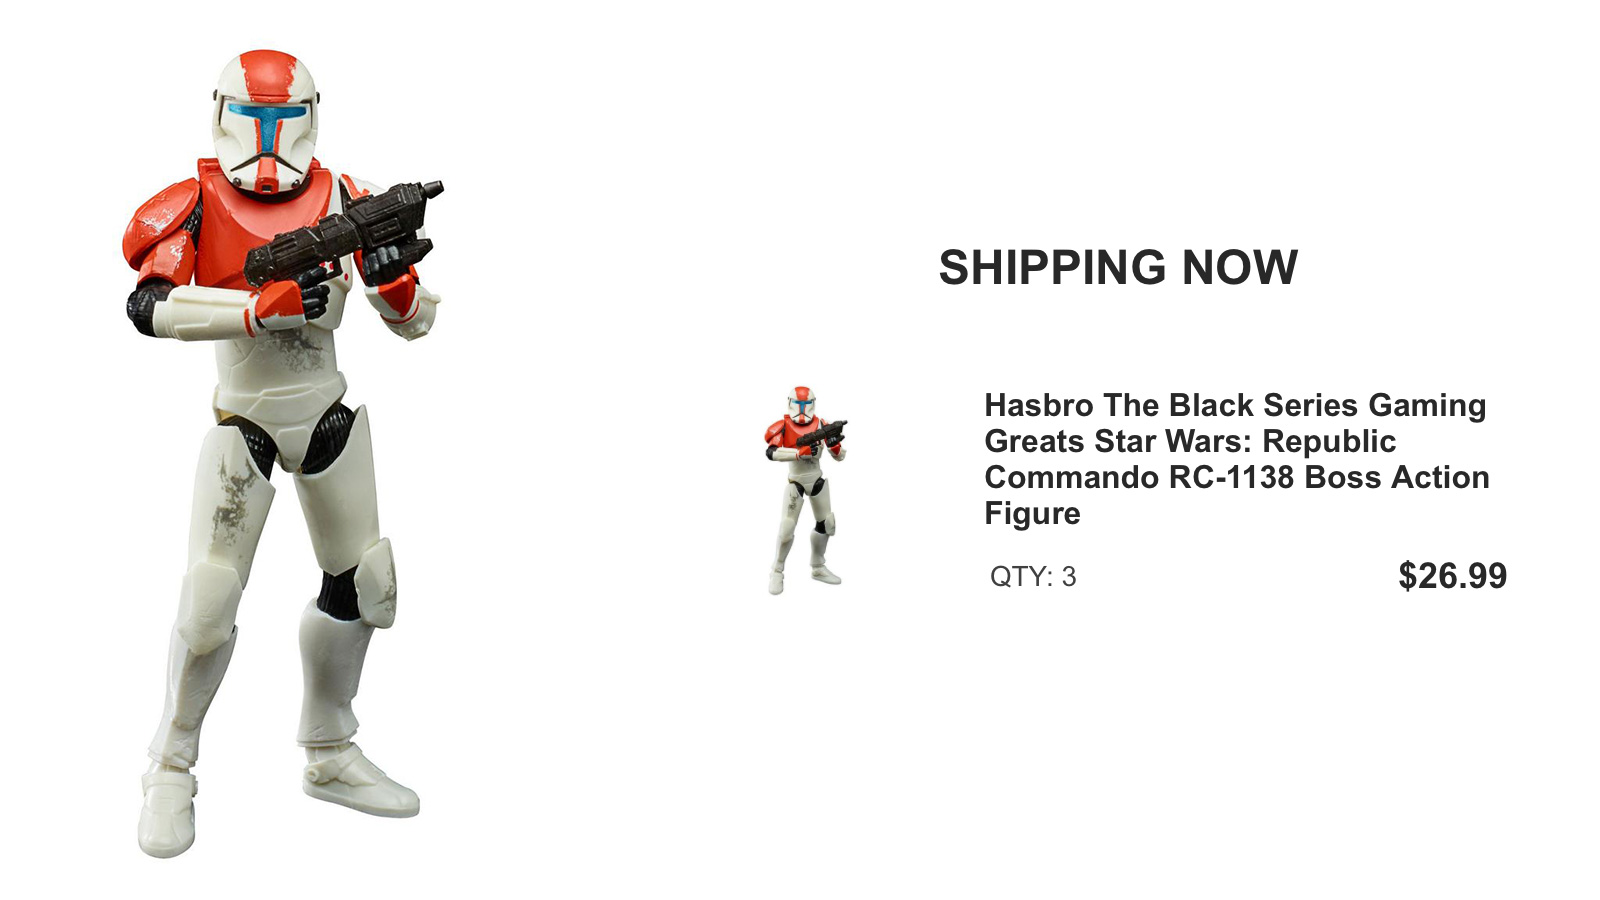 Shipping Now From GameStop.com - Exclusive The Black Series 6-Inch Republic Commando RC-1138 Boss